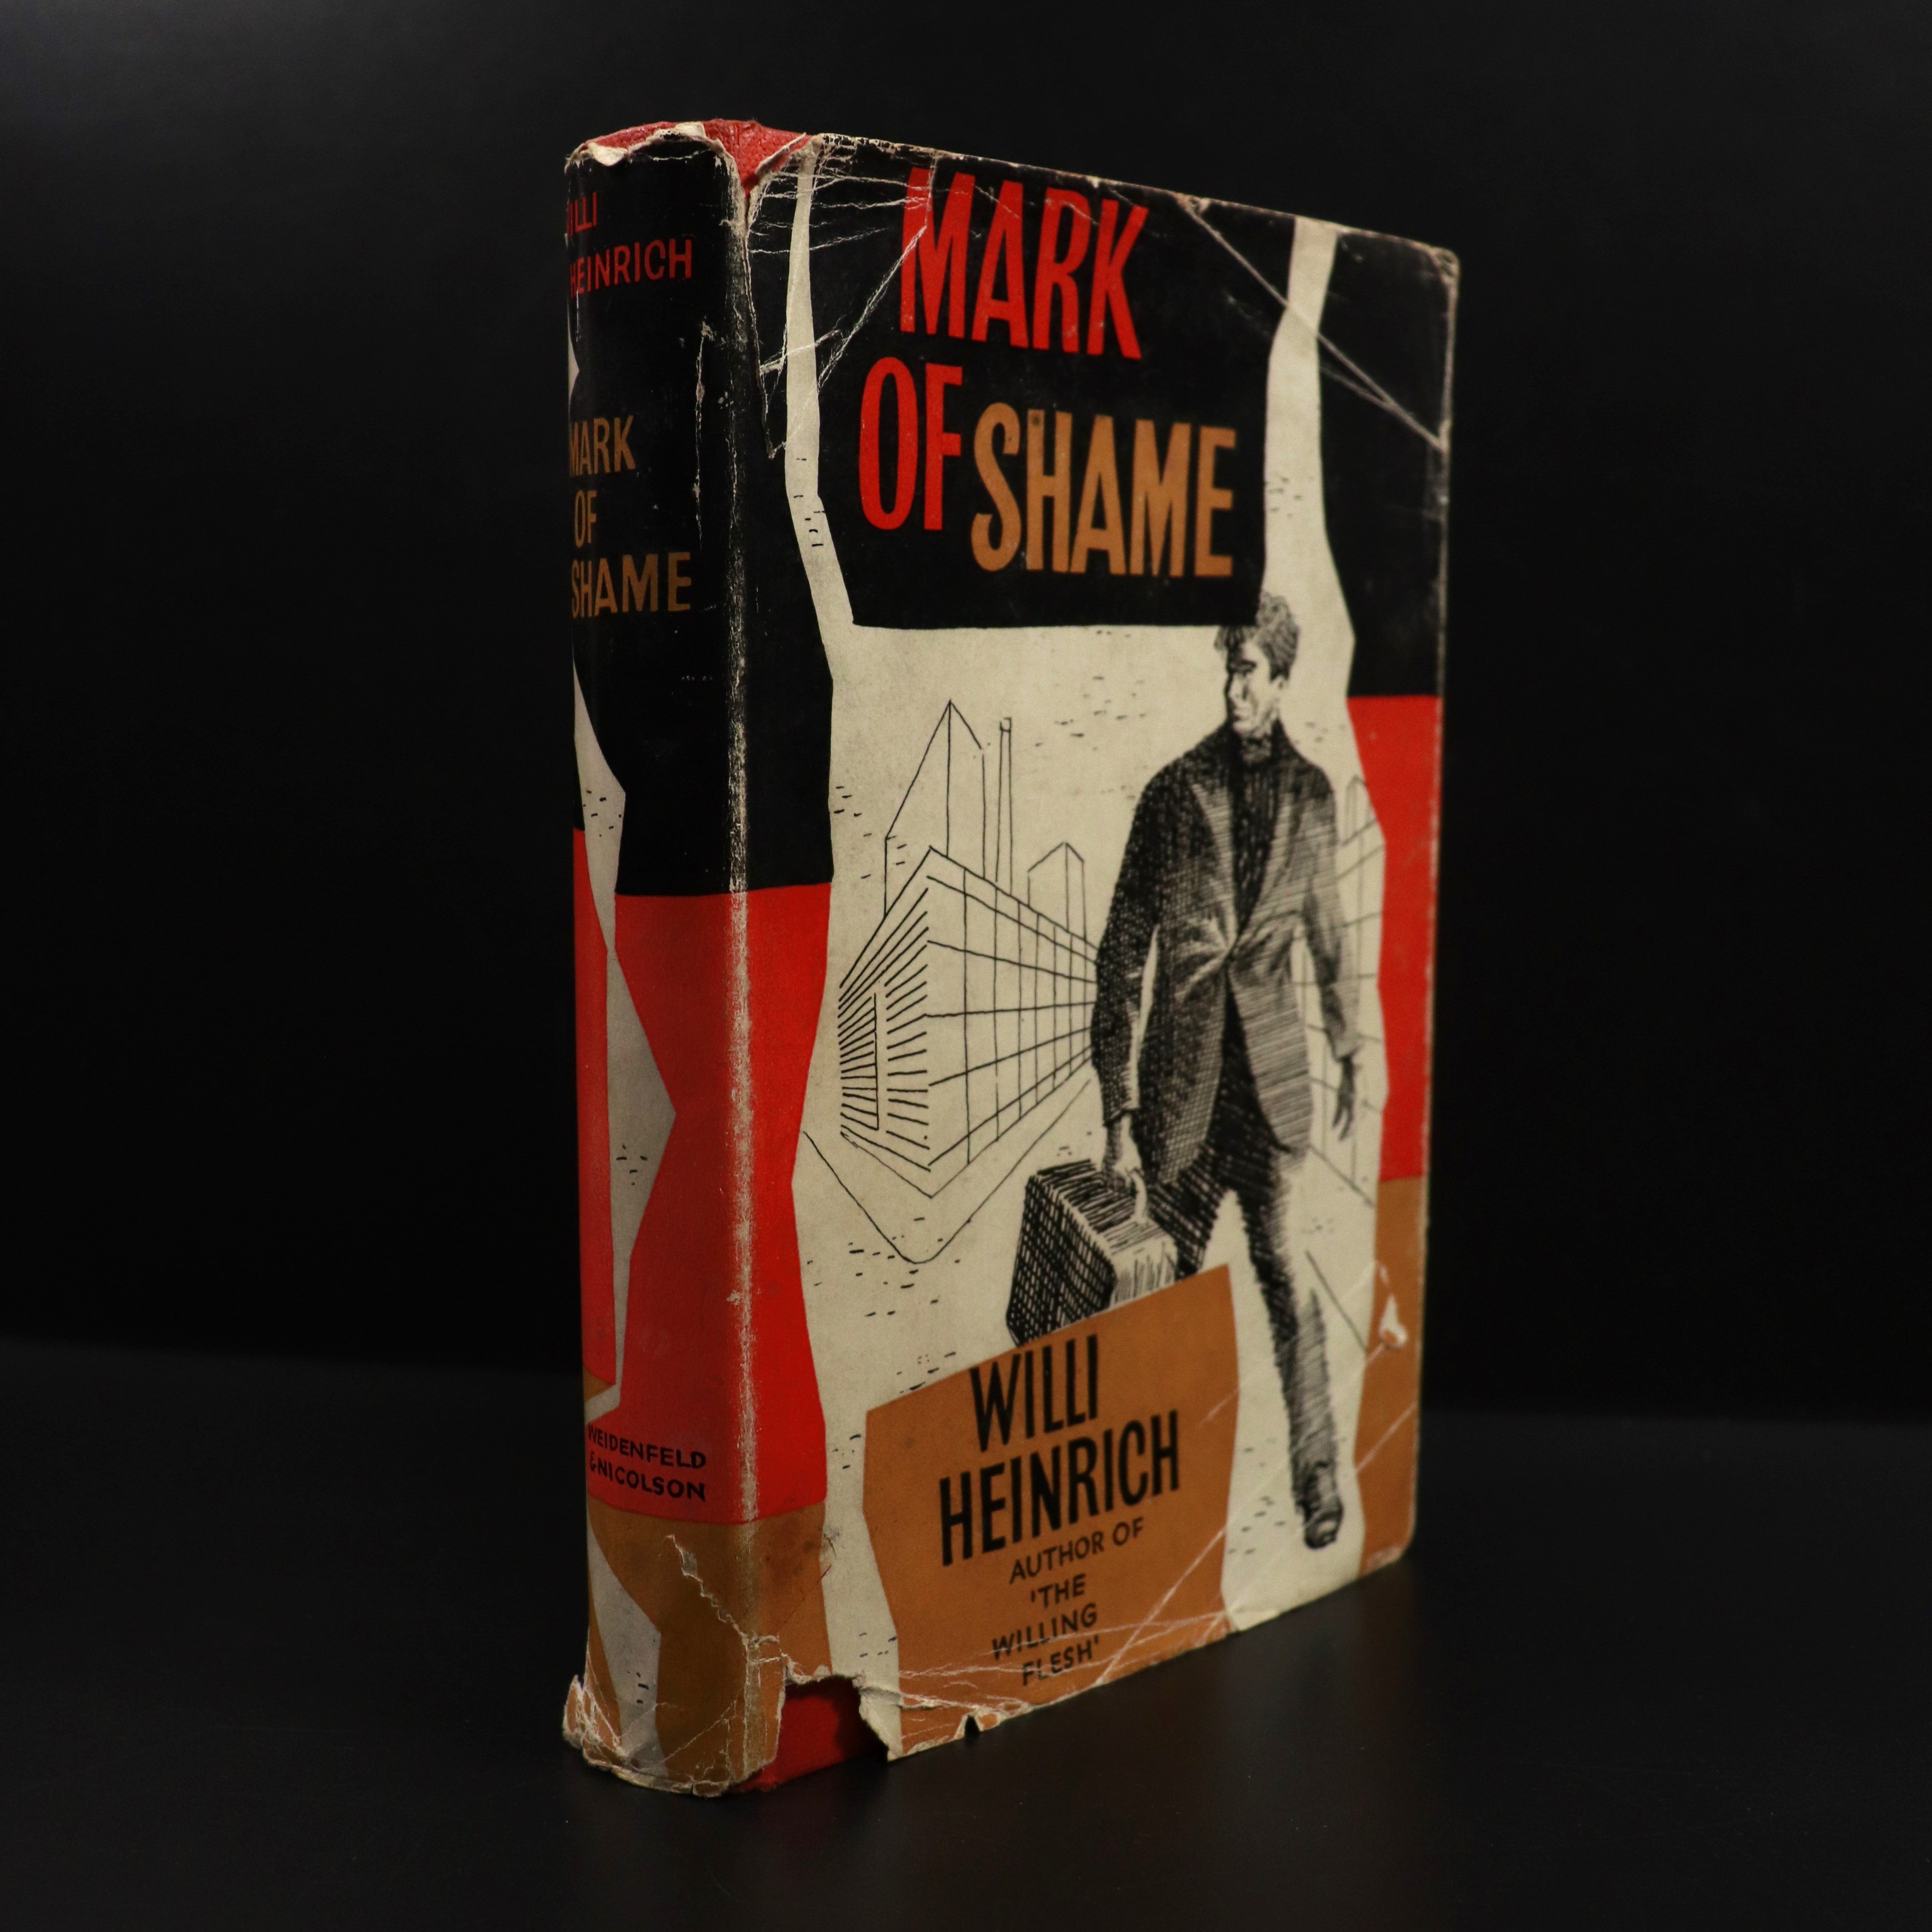 1959 Mark Of Shame by Willi Heinrich Vintage Military Fiction Book